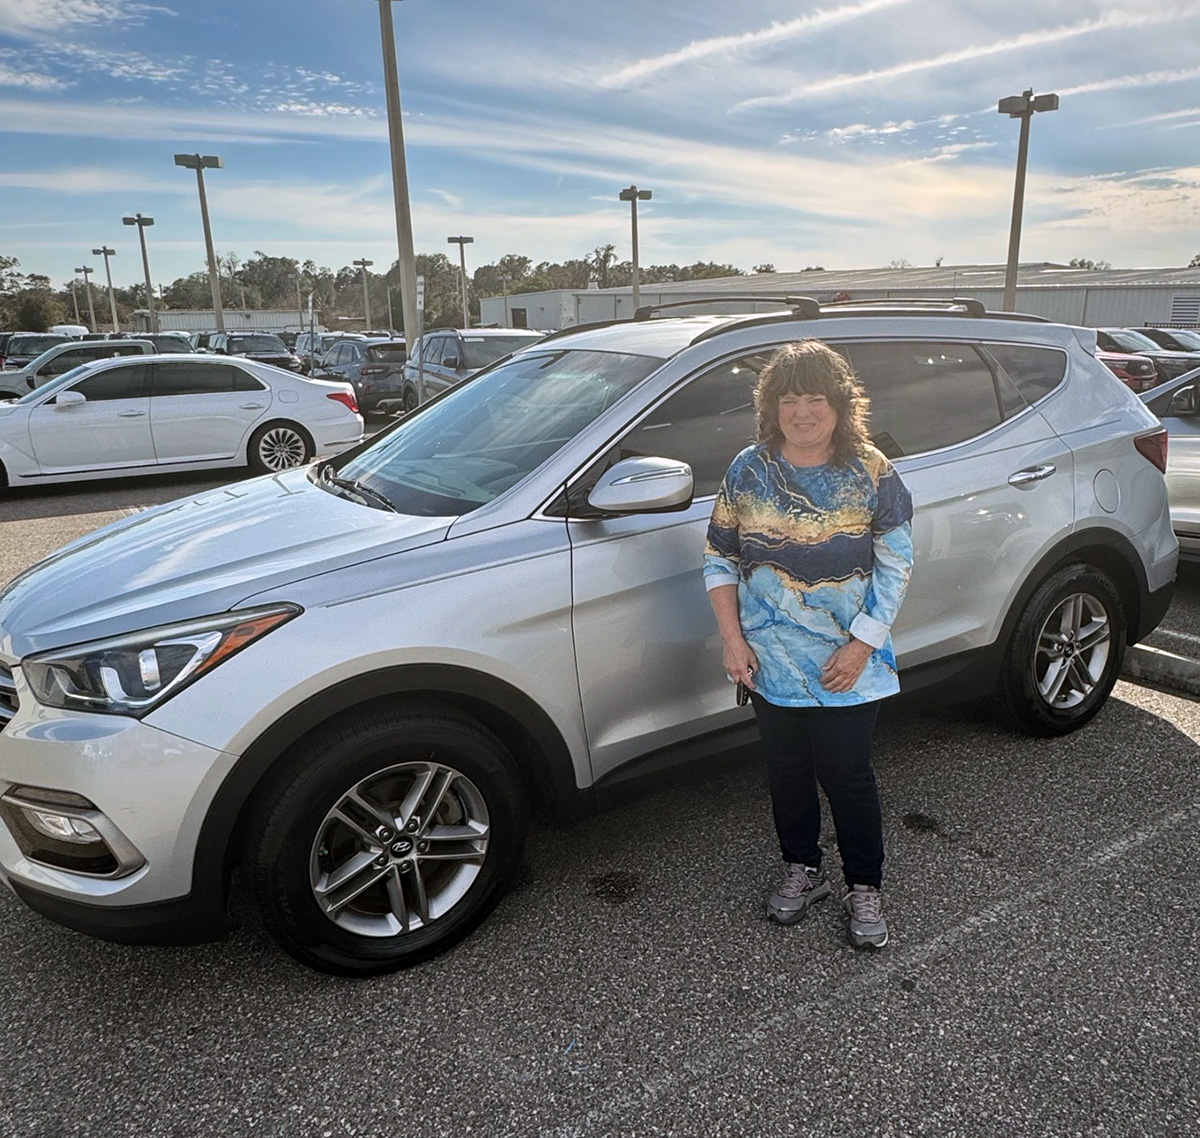 It's #Easy to get a #GreatDeal at #LakelandAutomall like Rebecca Masters did when she was searching for a #NewSUV & found the #HyundaiSanatFe with salesperson #RichardBerndt who made sure #GreatSerivce made buying #Fast & #Fun - #Enjoy Rebecca & #ThankYou, we're here for you!